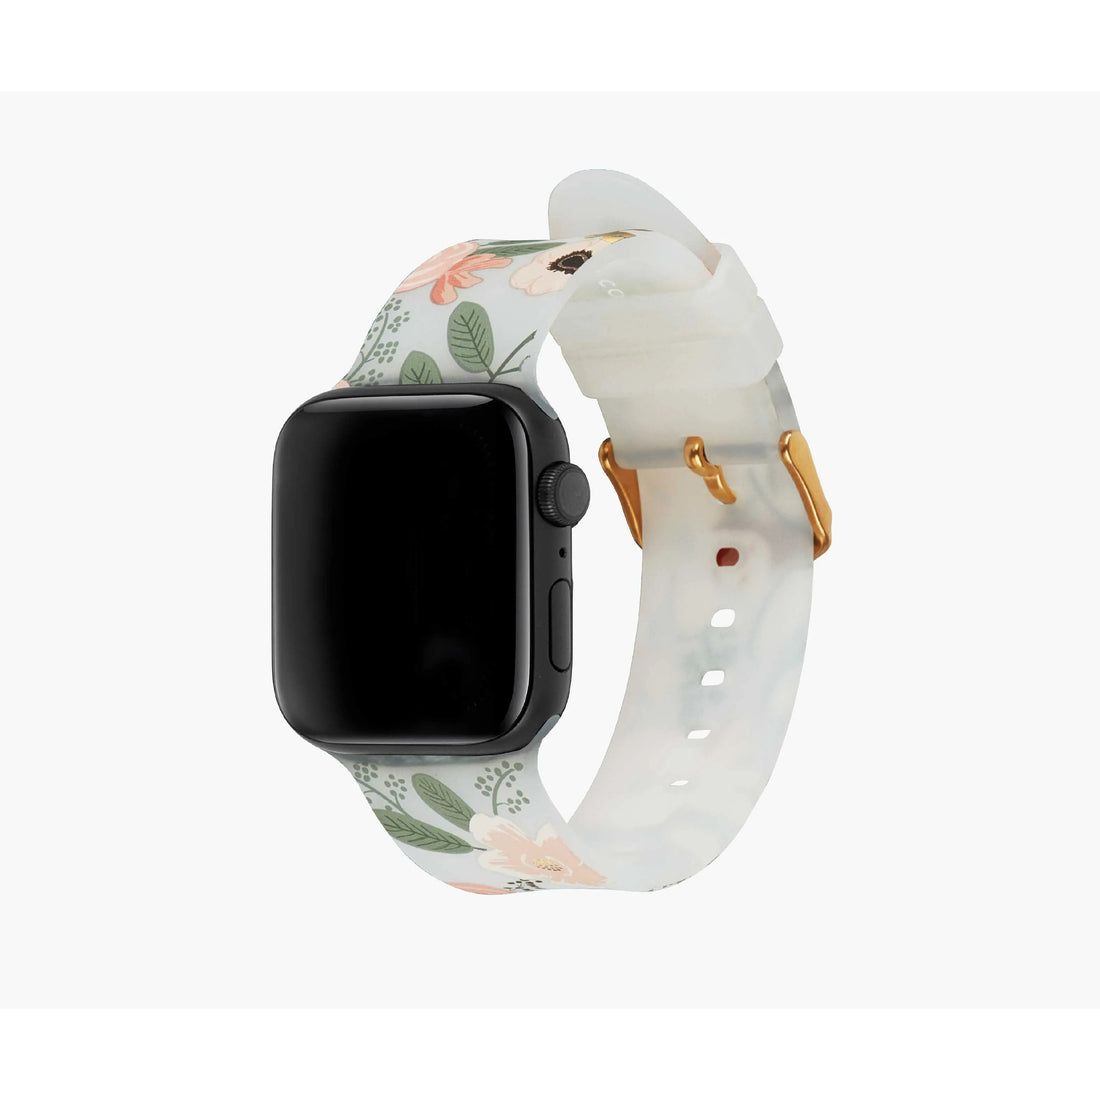 Rifle Paper Co. Watch Band for 38mm or 40mm Apple Watch - Wild